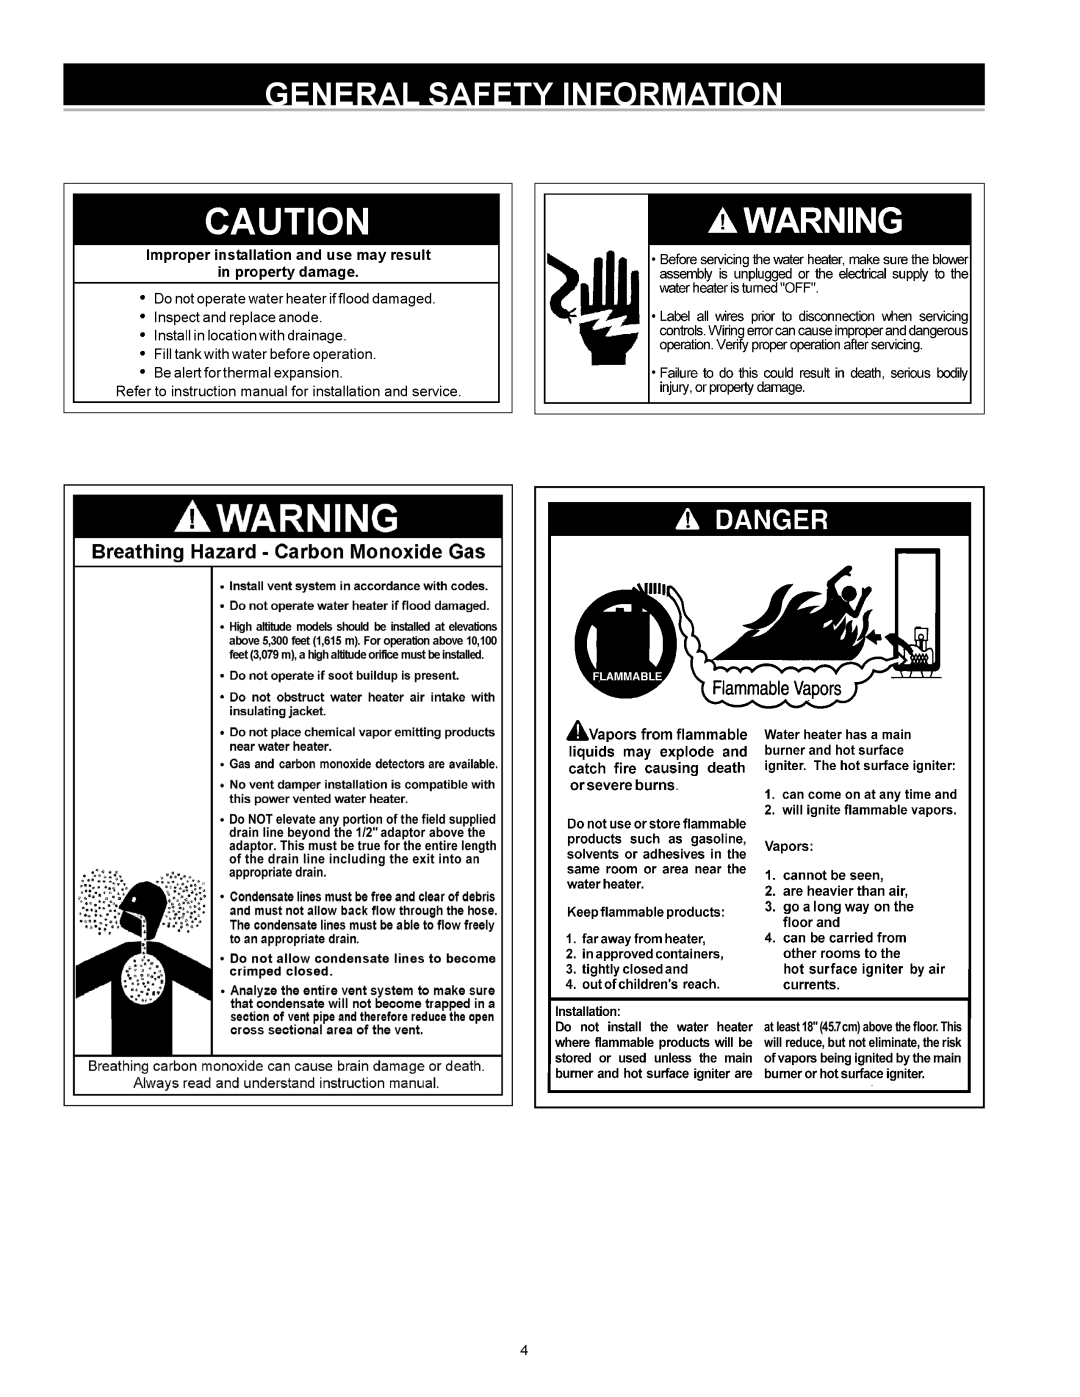 American Water Heater VG6250T76NV Series 100 instruction manual General Safety Information 